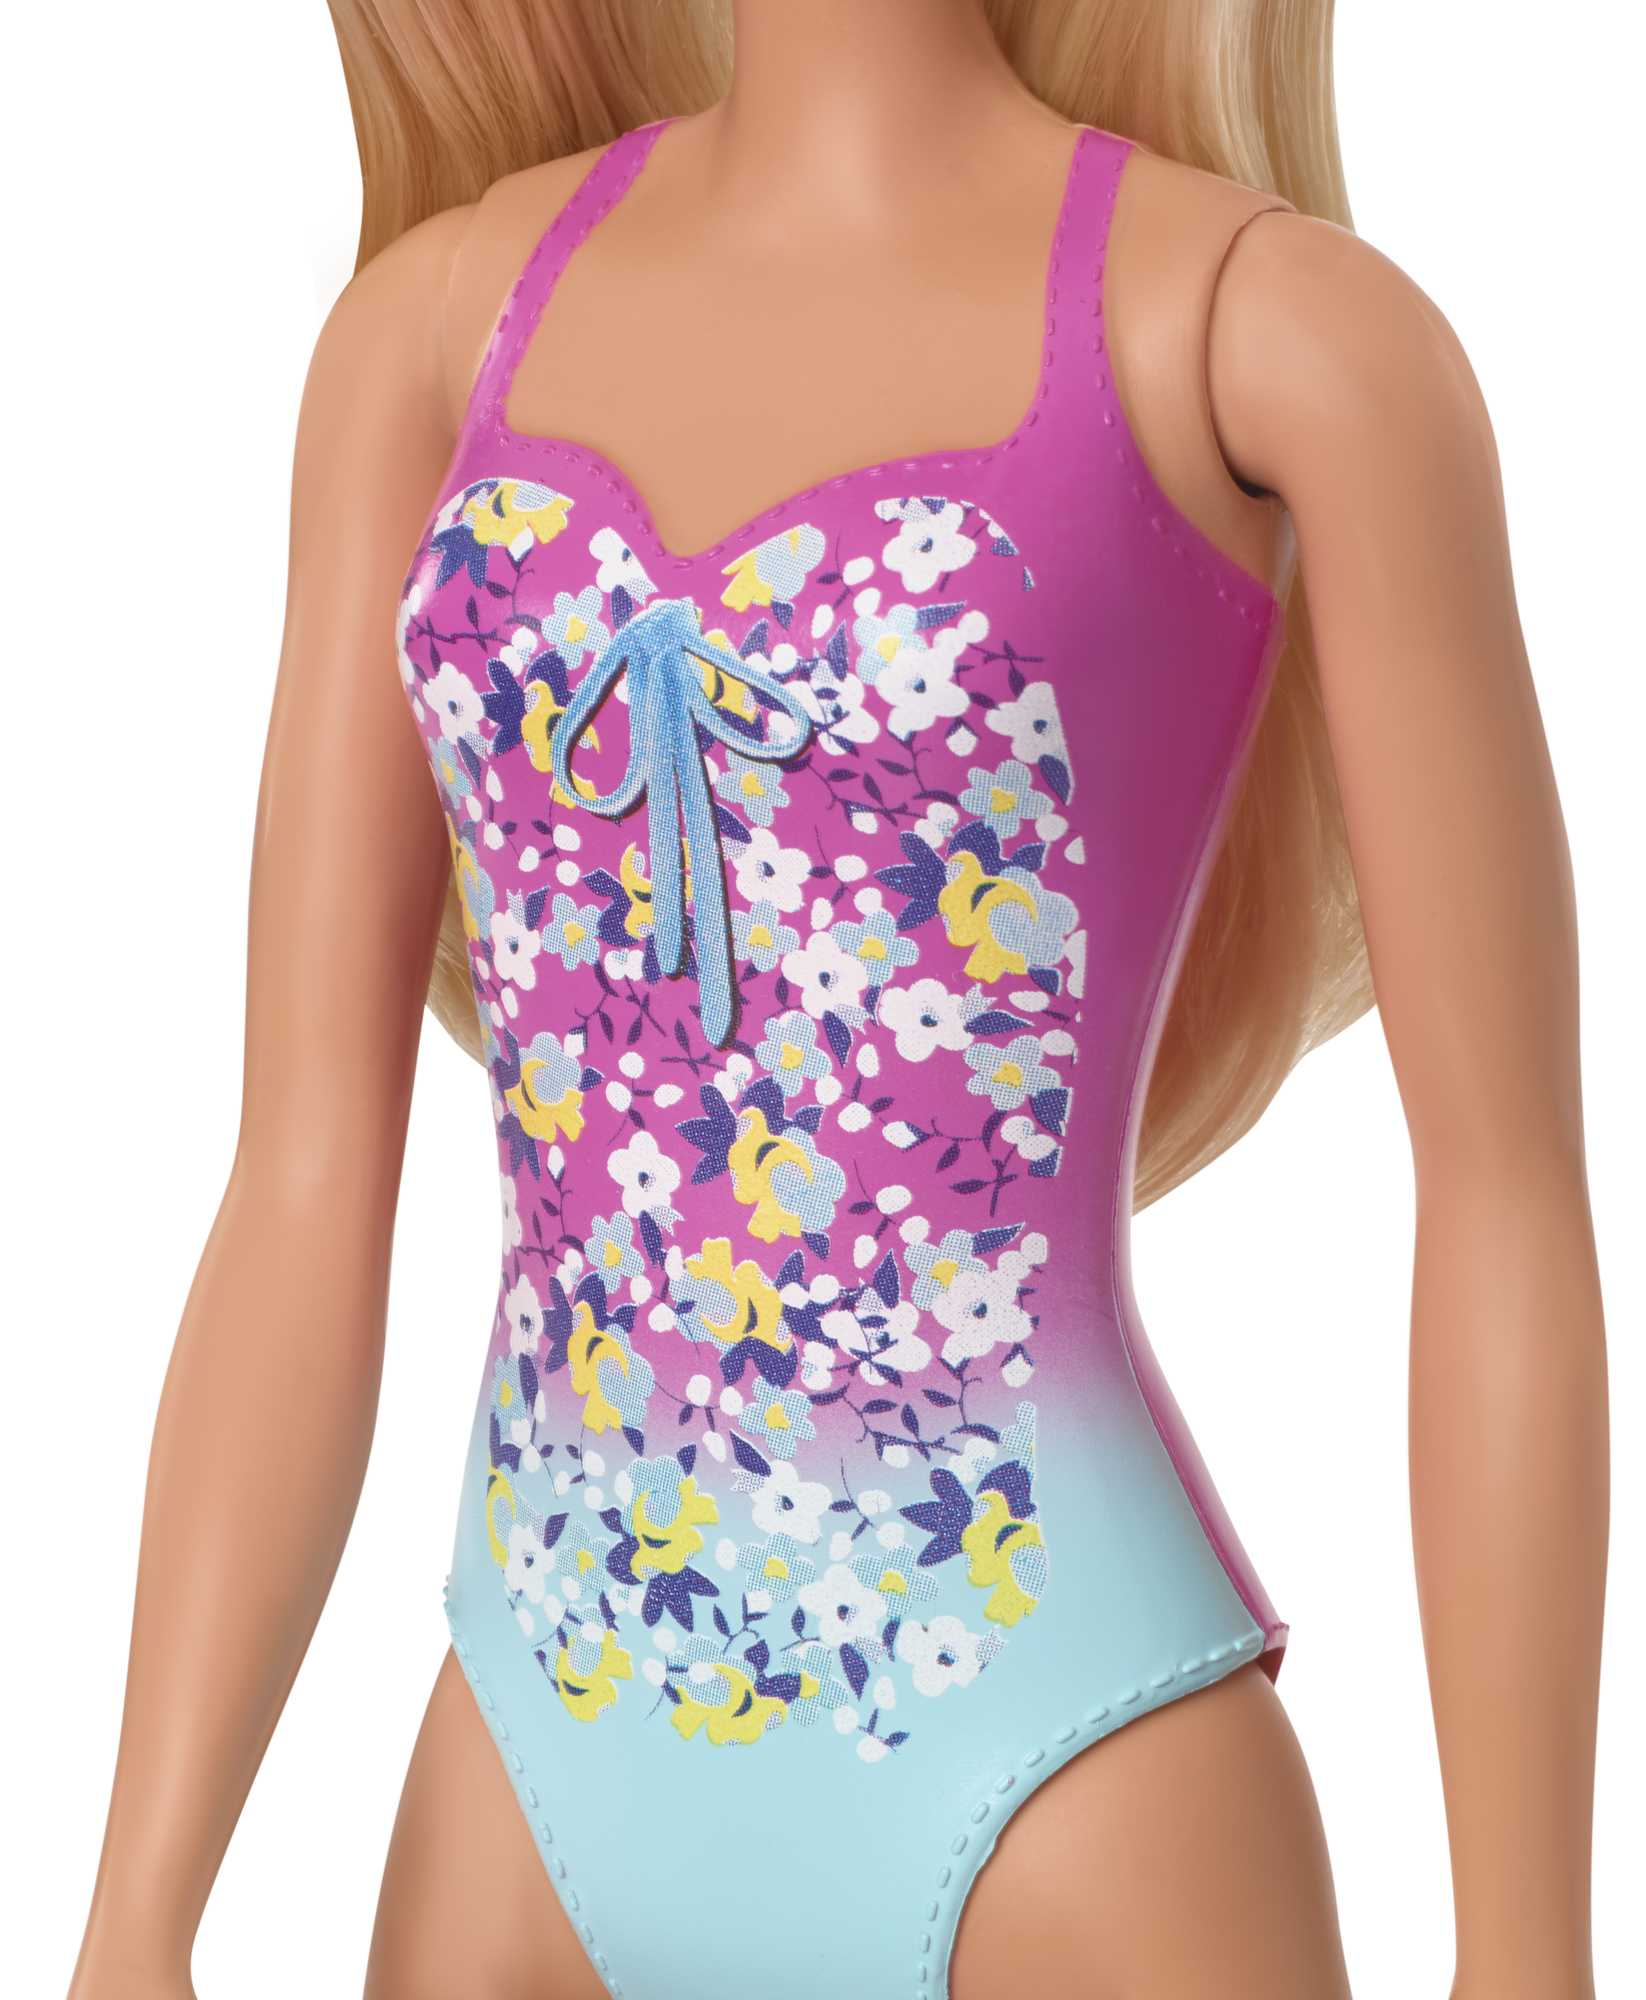 Barbie Swimsuit Beach Doll with Blonde Hair & Pink Floral Print Suit - image 3 of 6